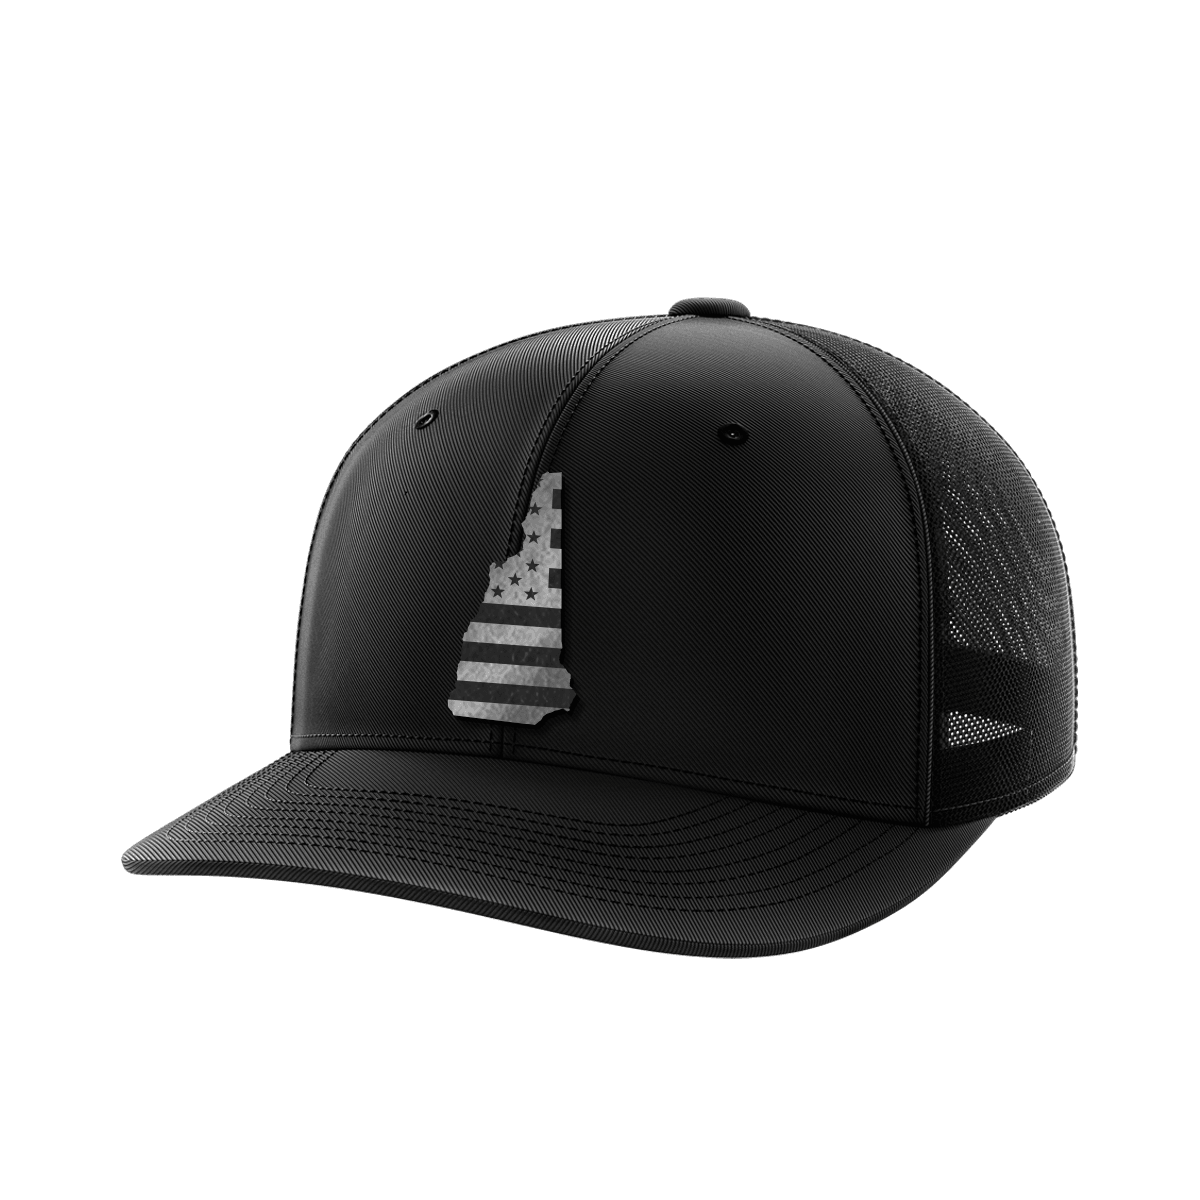 New Hampshire United Hats - Greater Half